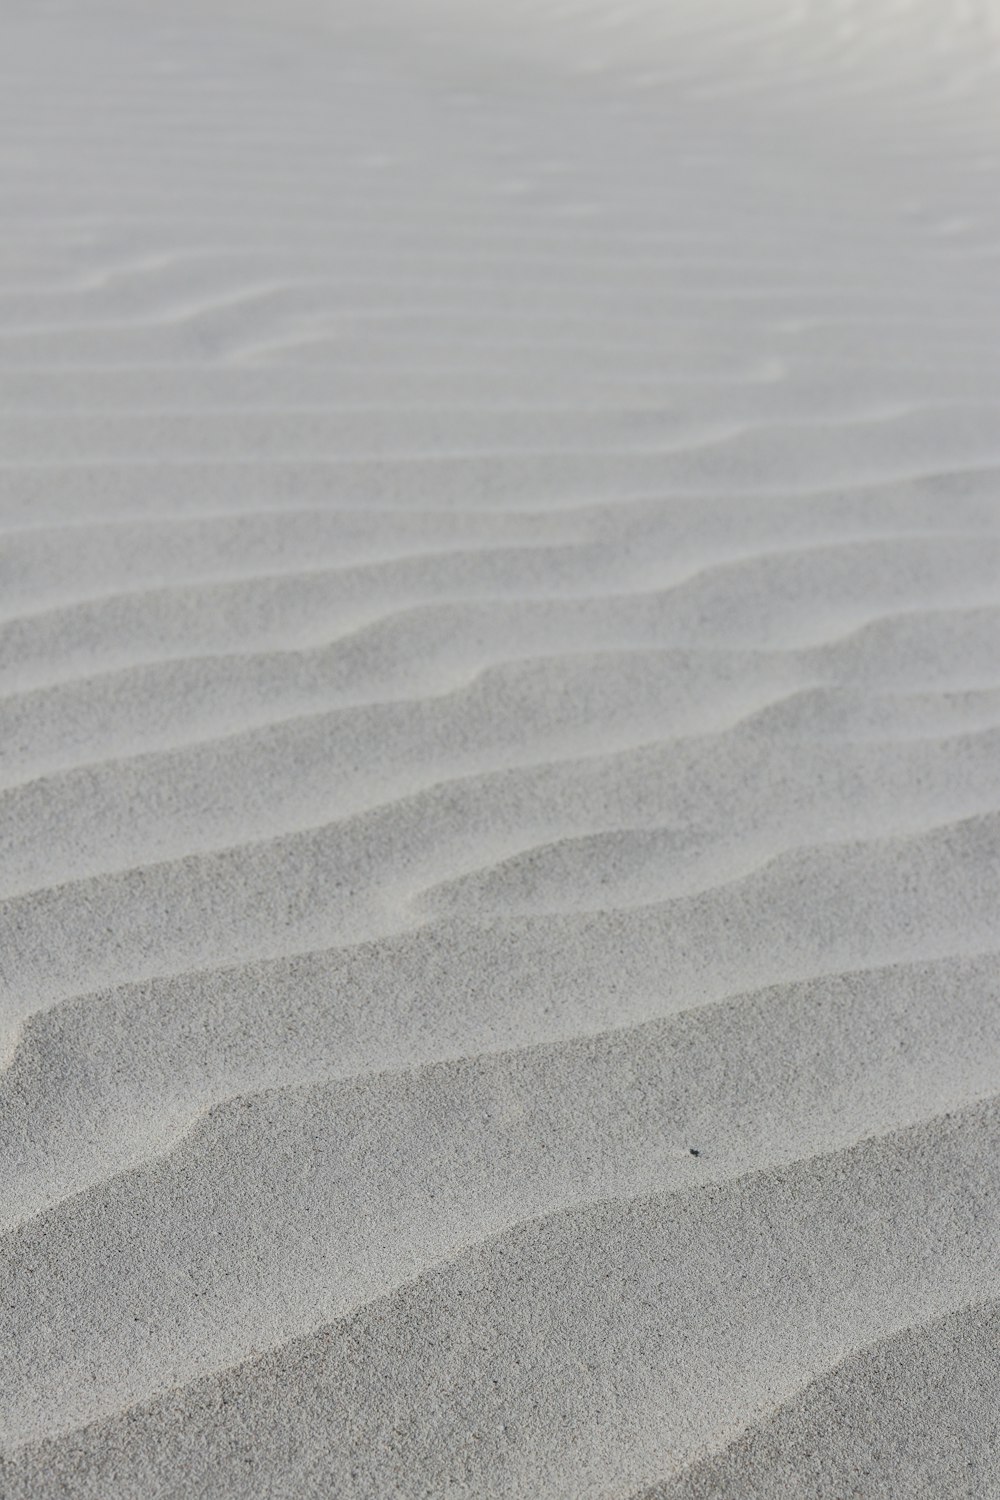 a white sand dune with small ridges in the sand